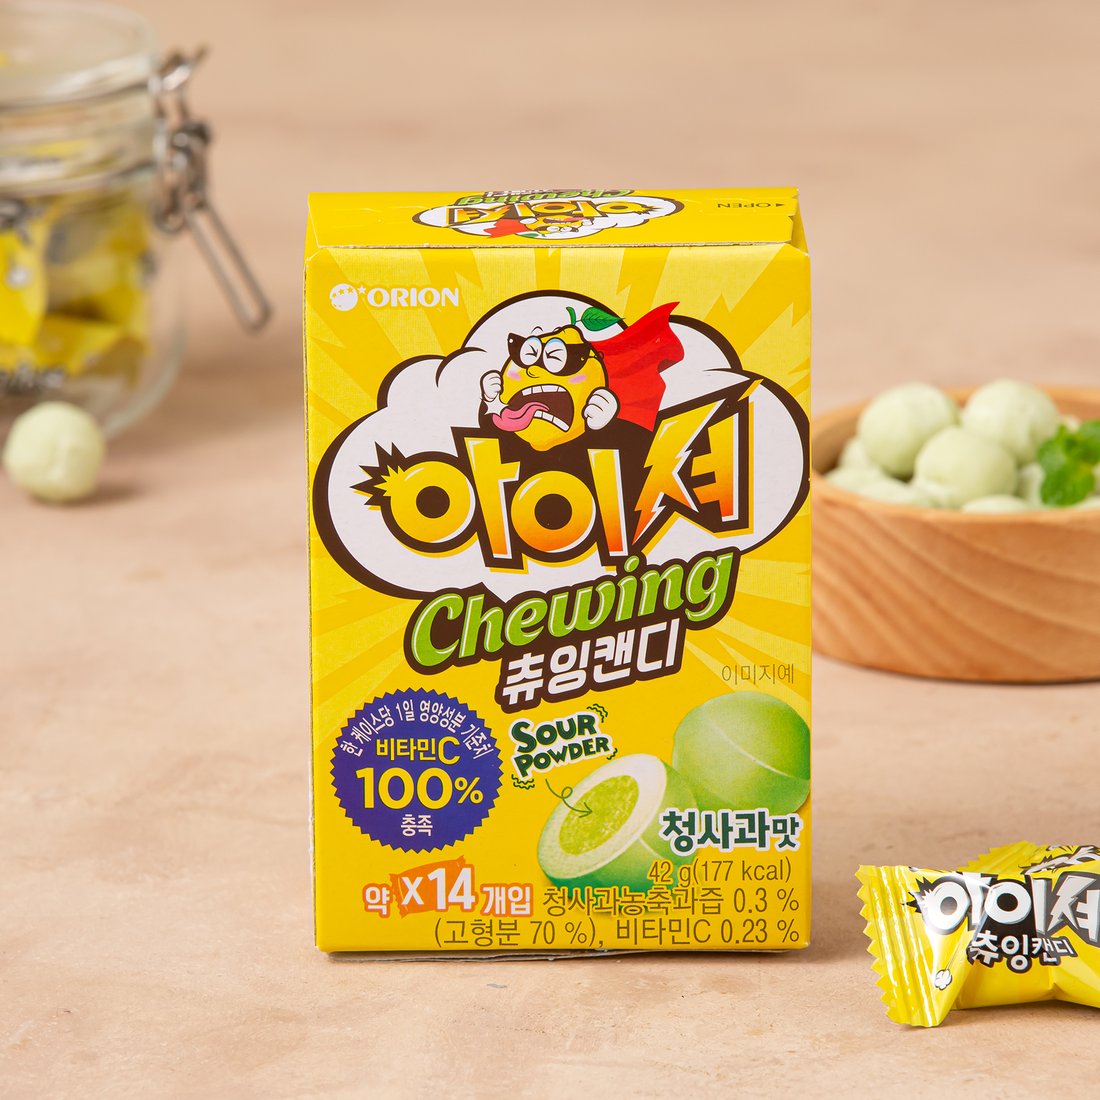 Sour Green apple Flavored Candy 아이셔 청사과맛 캔디